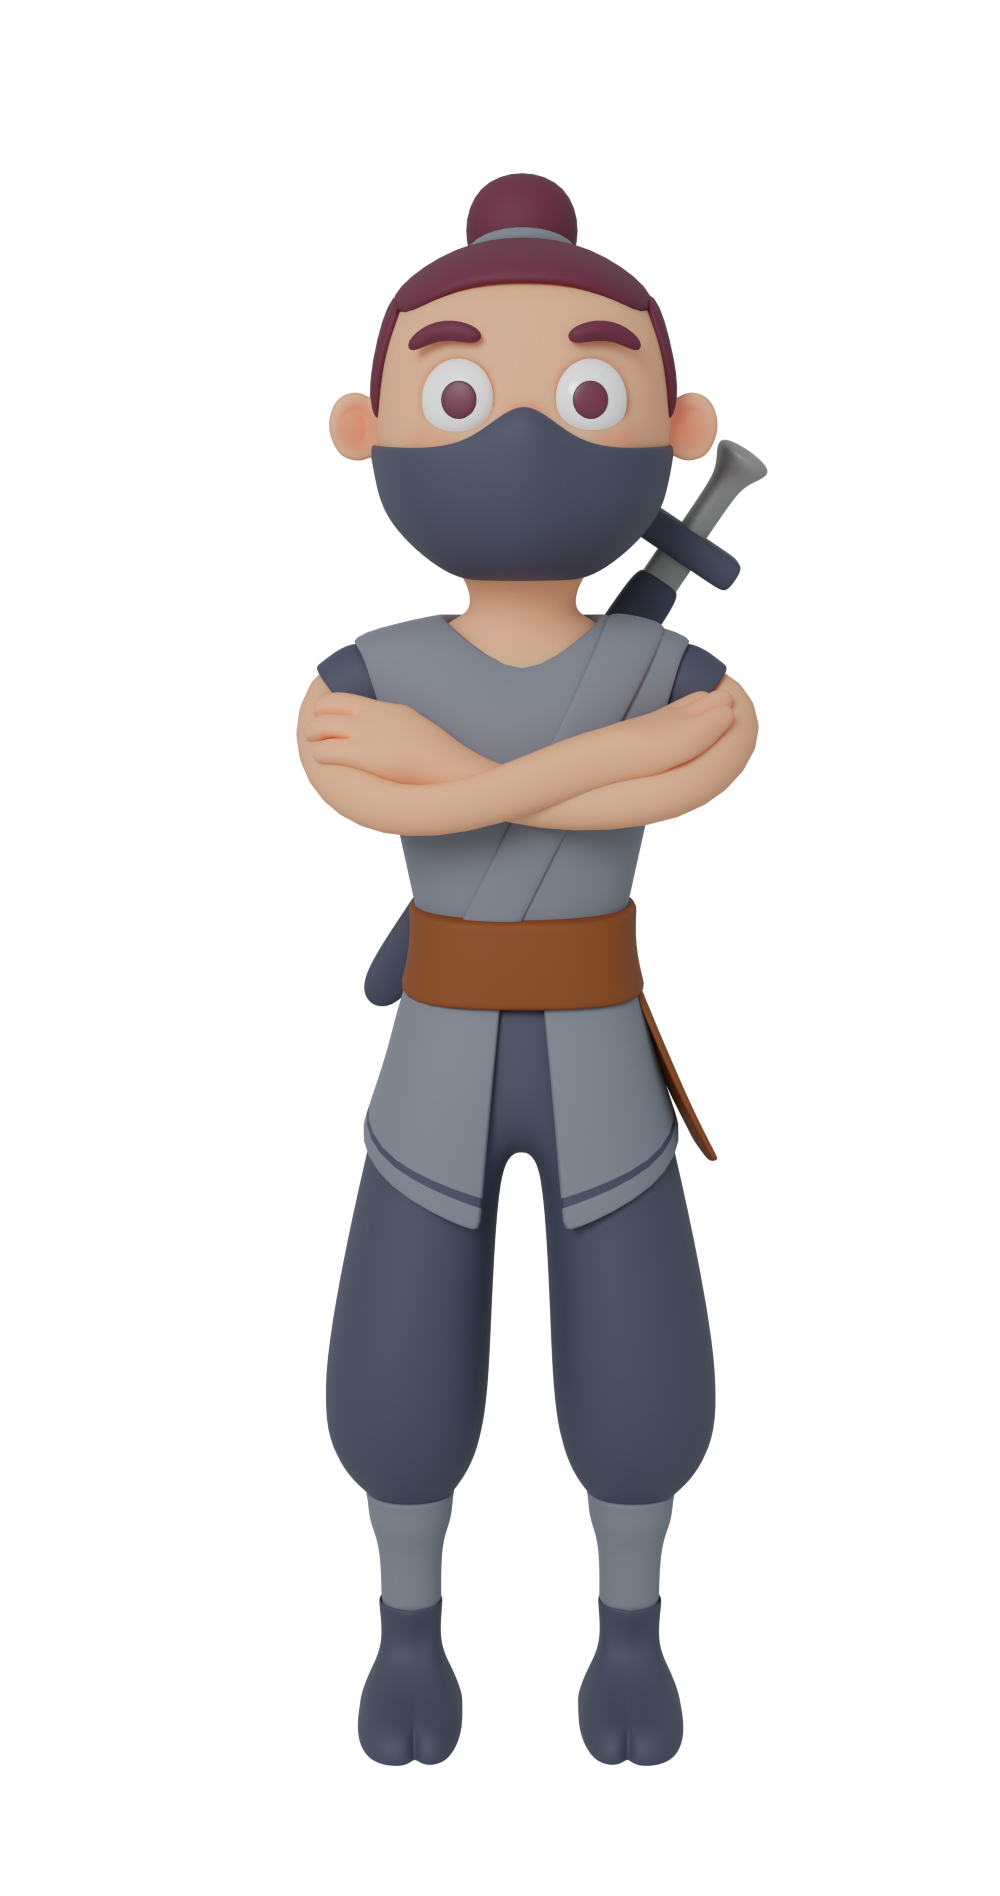 3d character design of a man dressed up as a ninja